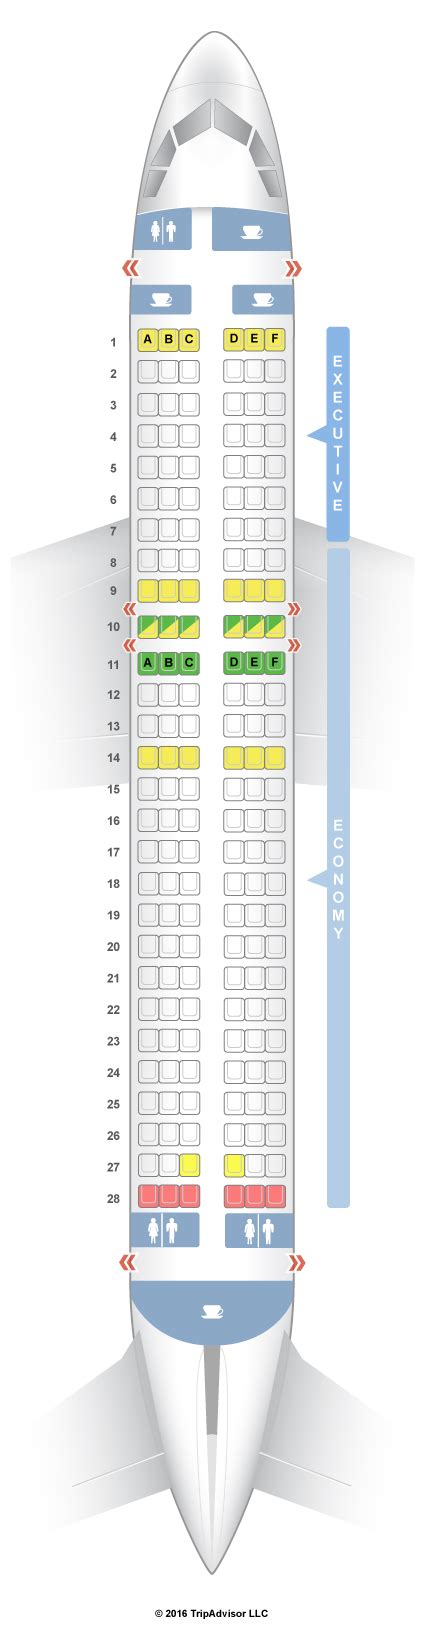 Airbus A320neo Seat Map Tap Image To U